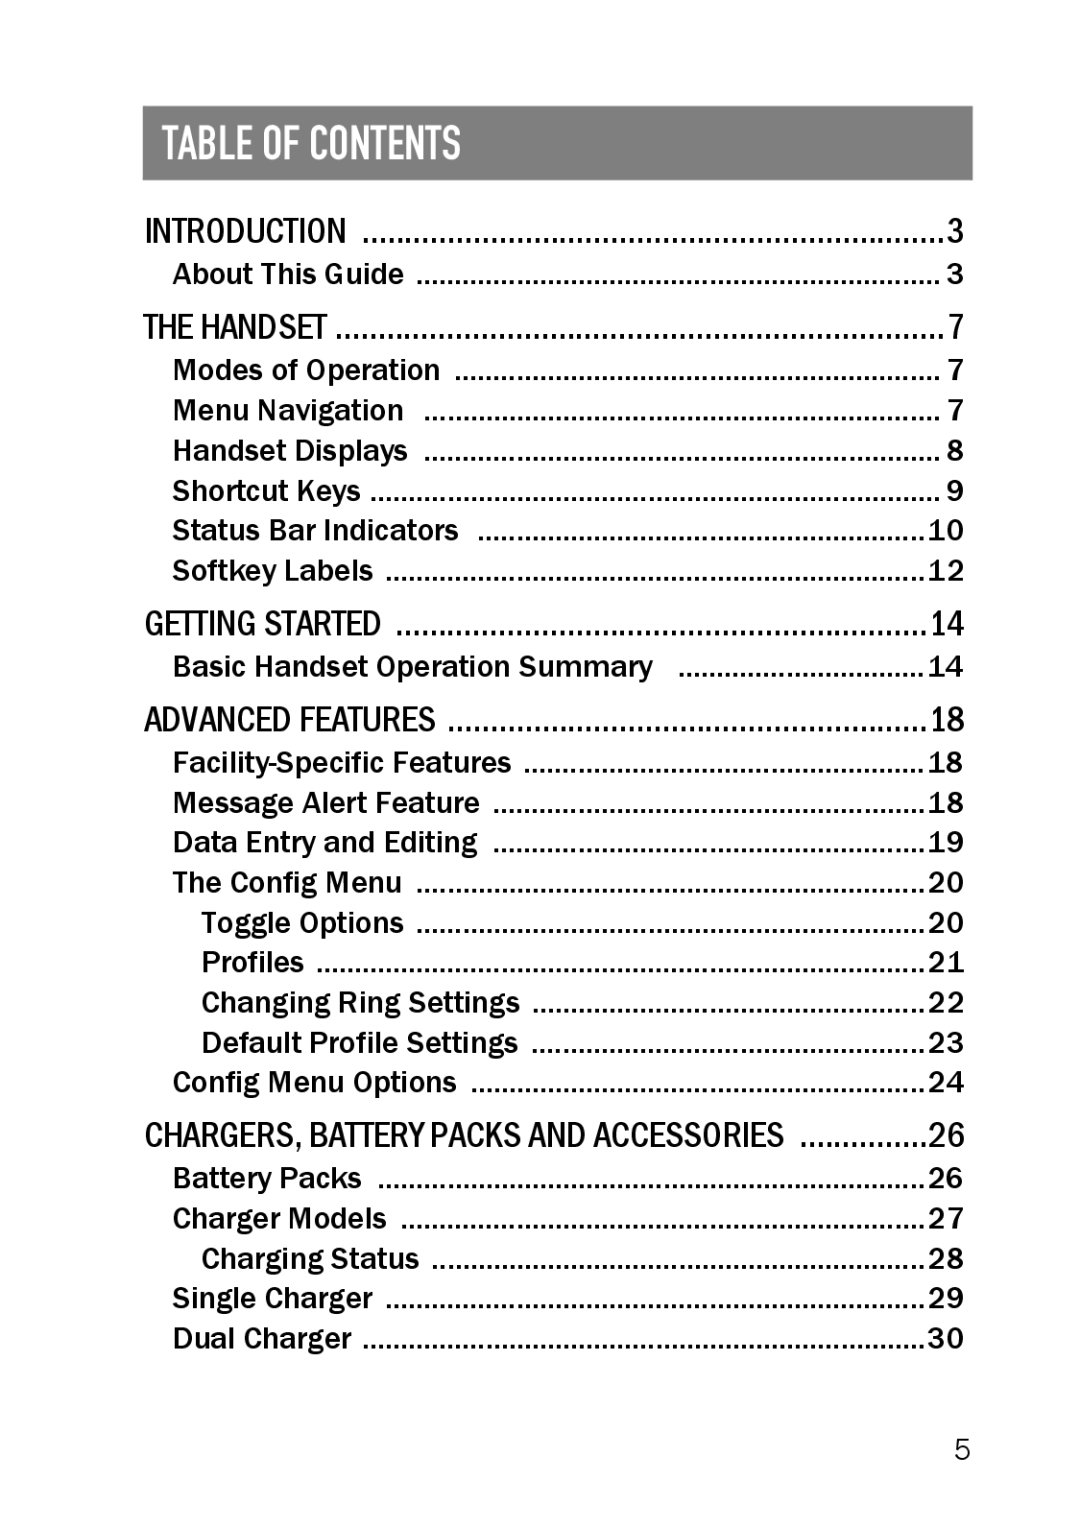 SpectraLink LINK 6020 manual Table of Contents 